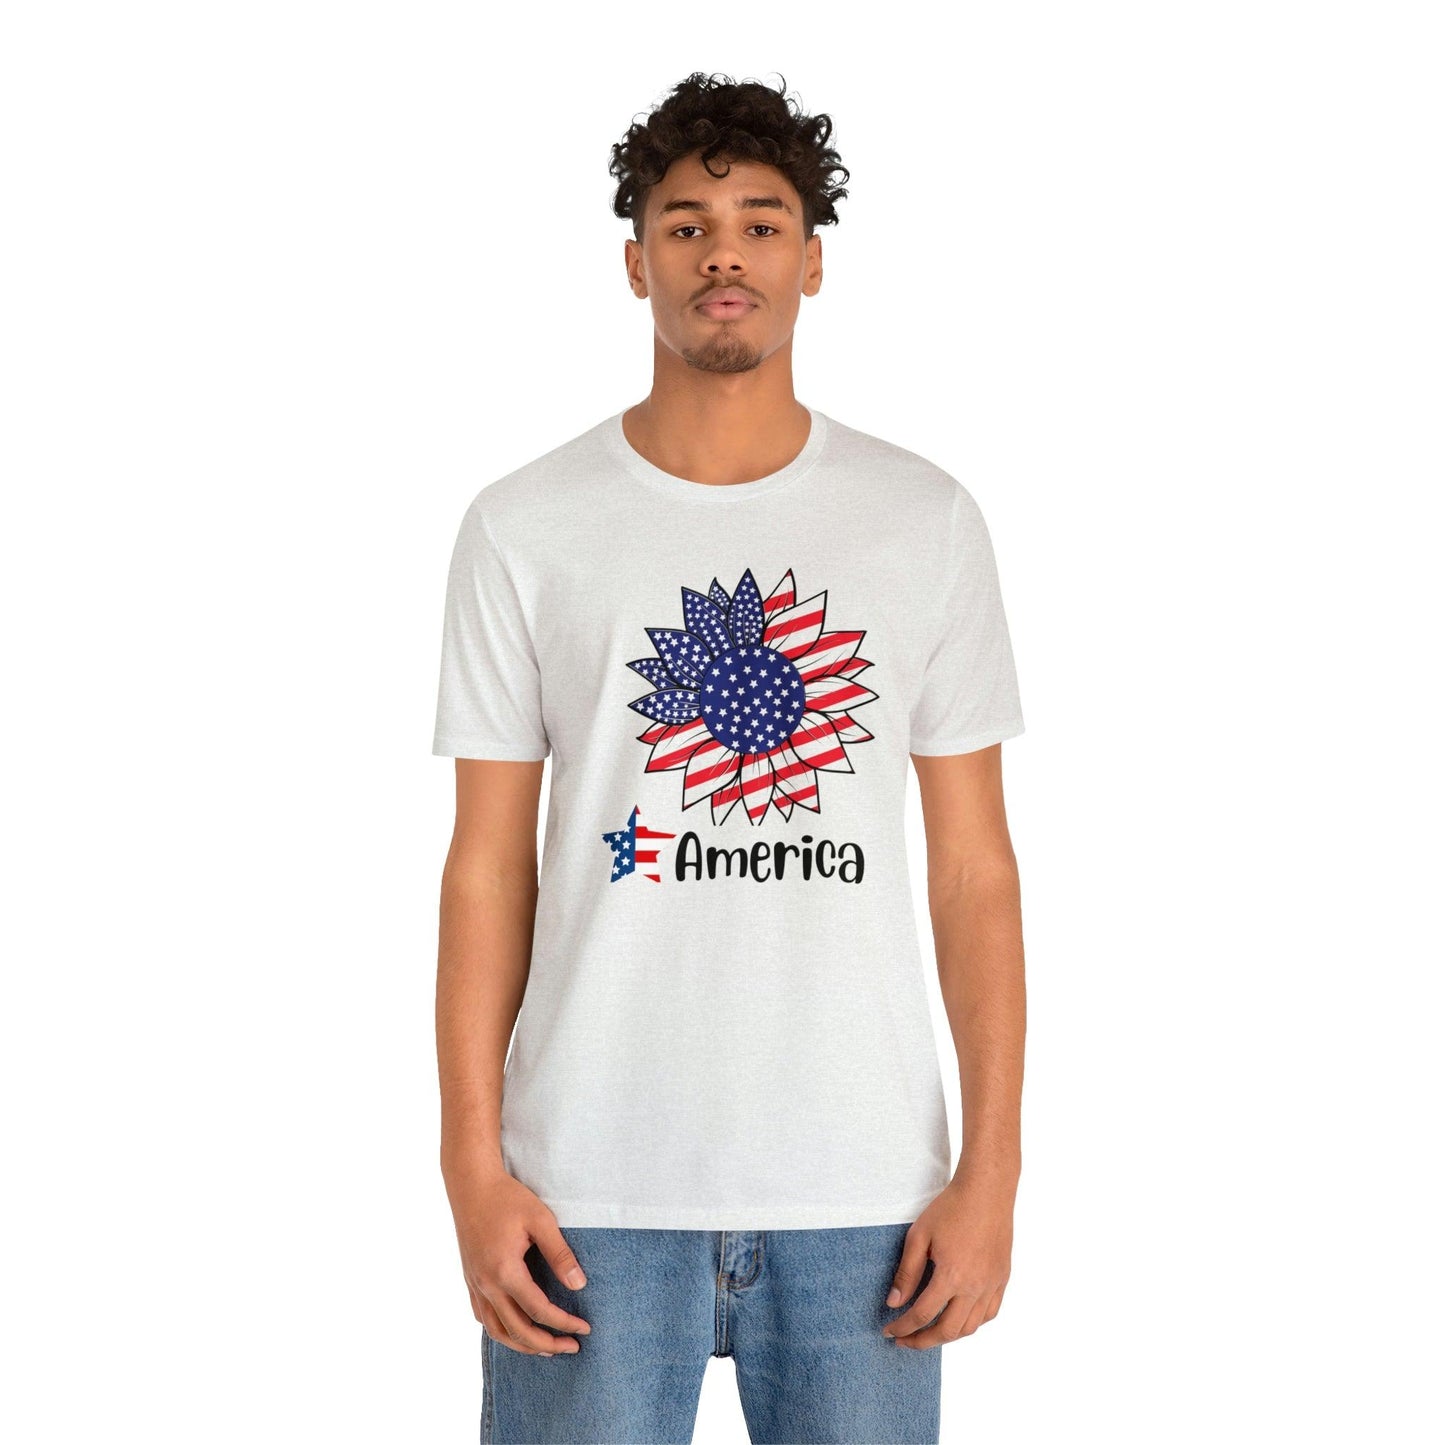 Memorial Day shirt, freedom shirt, Independence Day, 4th of July shirt